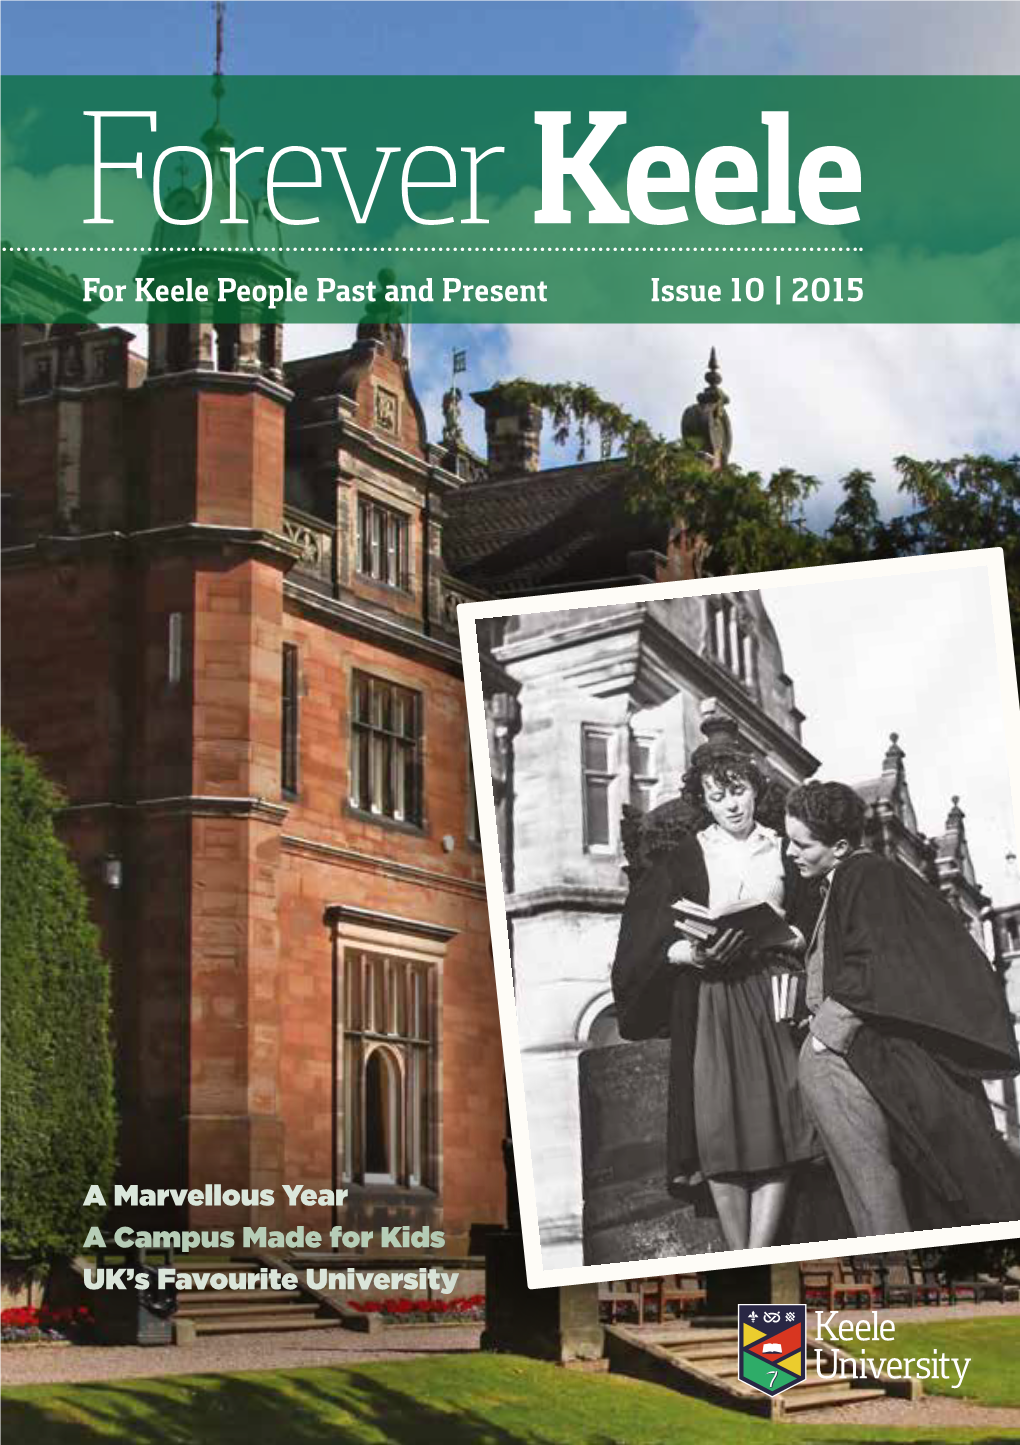 For Keele People Past and Present Issue 10 | 2015